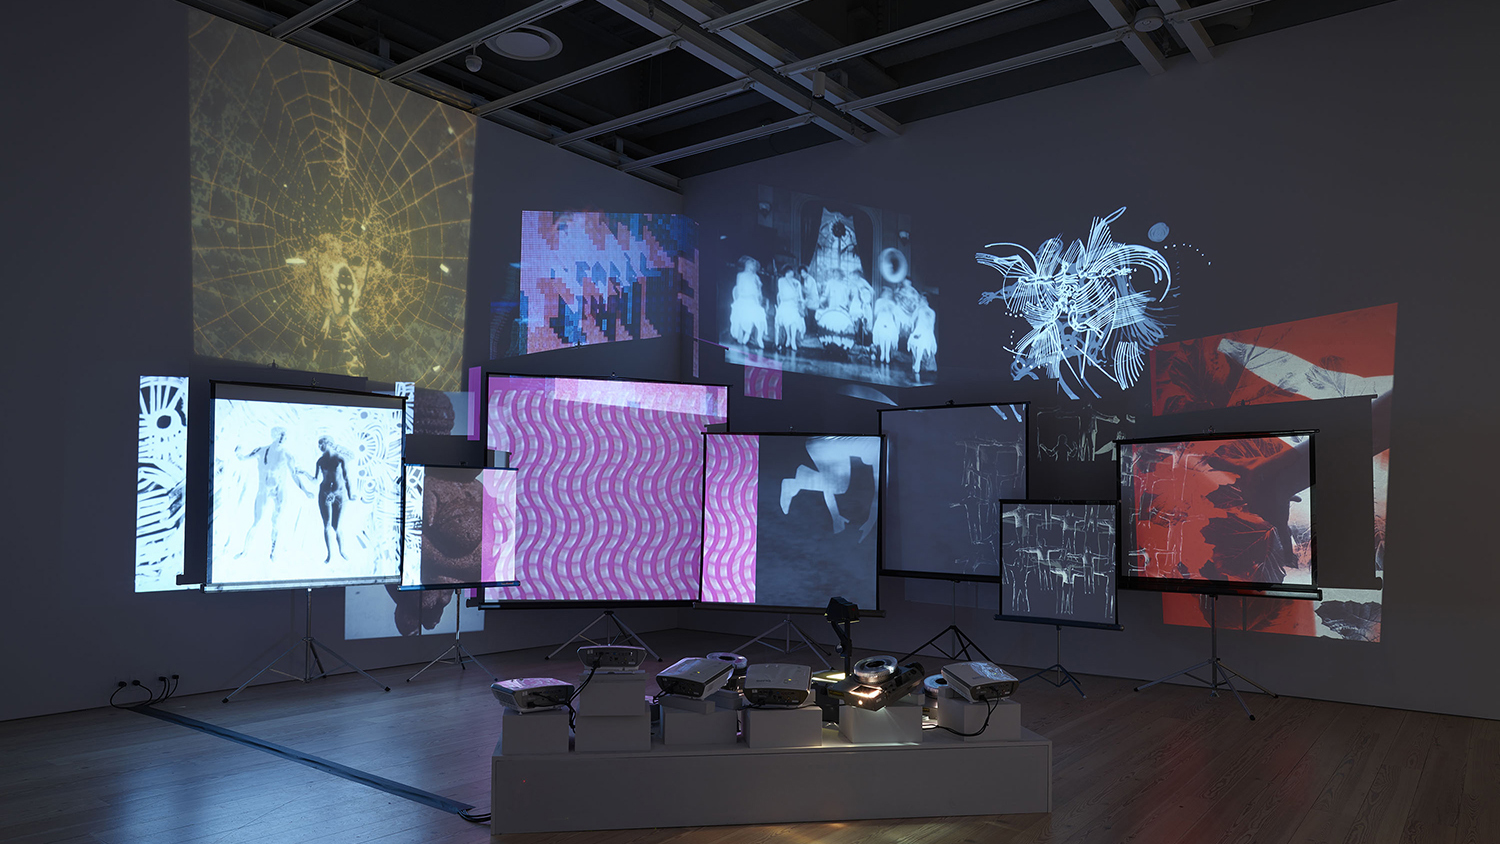 Installation view of “Dreamlands: Immersive Cinema and Art, 1905-2016” (Whitney Museum of American Art, New York, October 28, 2016-February 5, 2017). Dora Budor, Adaption of an Instrument. Courtesy of the artist © 2016